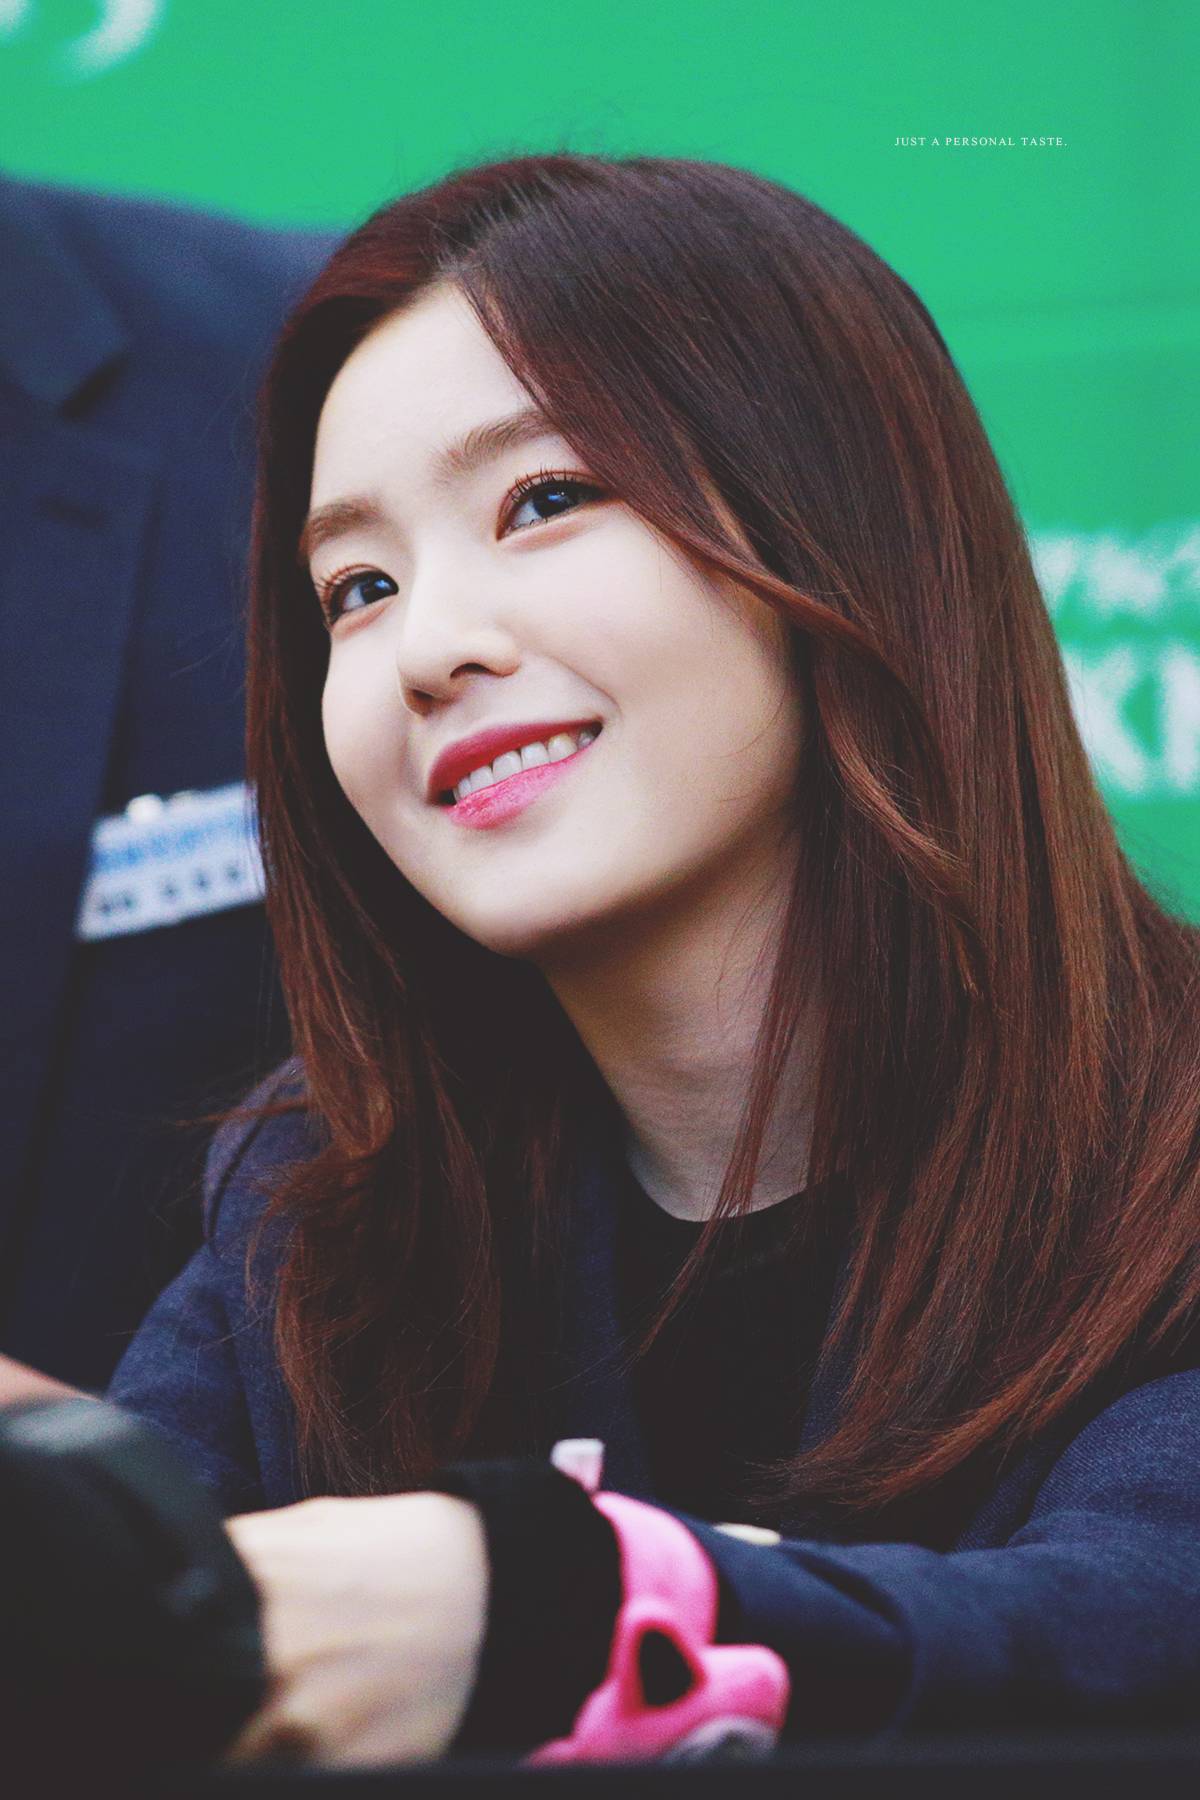 These 9 Fan-Photos Reveal How Irene Looks In Real Life - Koreaboo